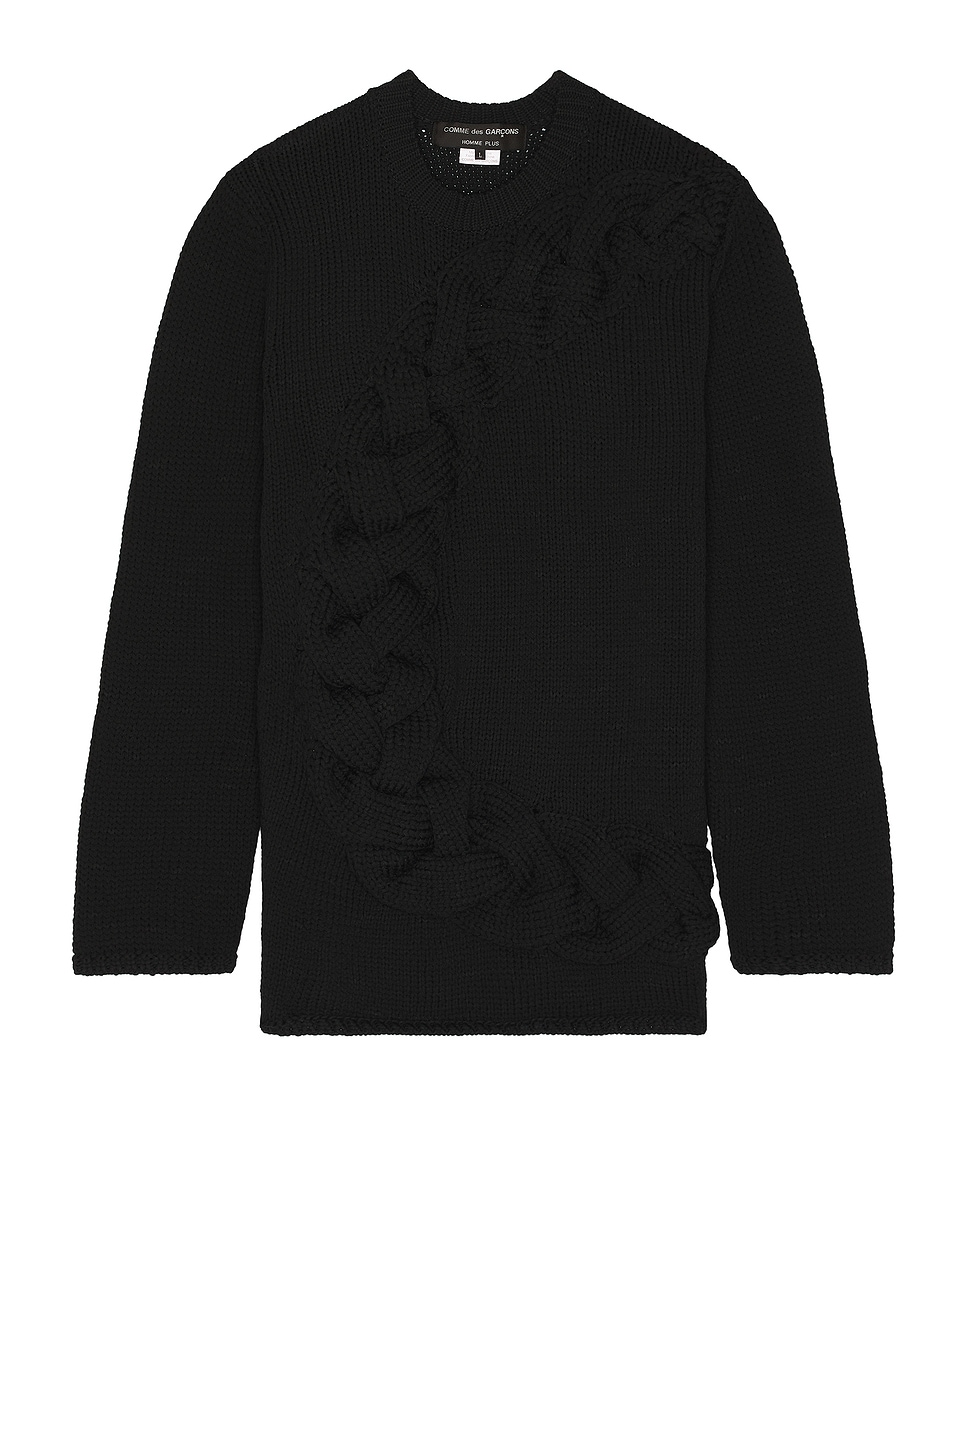 Image 1 of COMME des GARCONS Homme Plus Cross Pattern Tee in Black